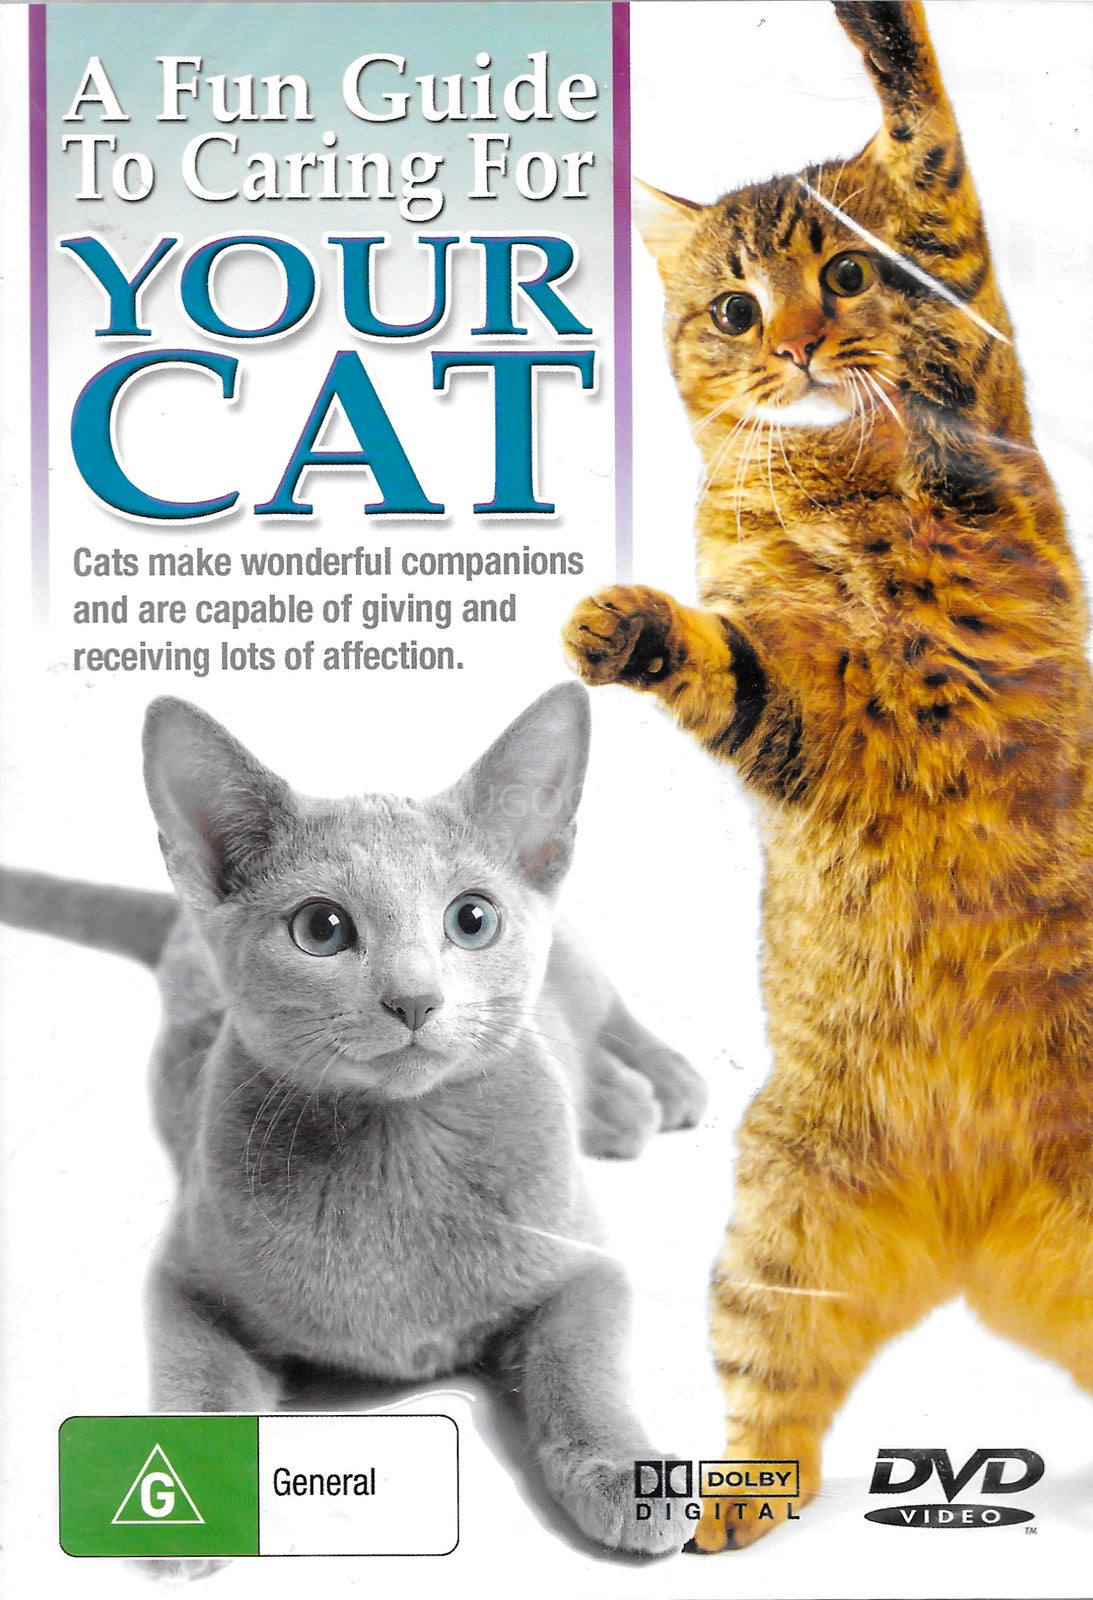 A Fun Guide To Caring For Your Cat - Rare DVD Aus Stock New Region ALL